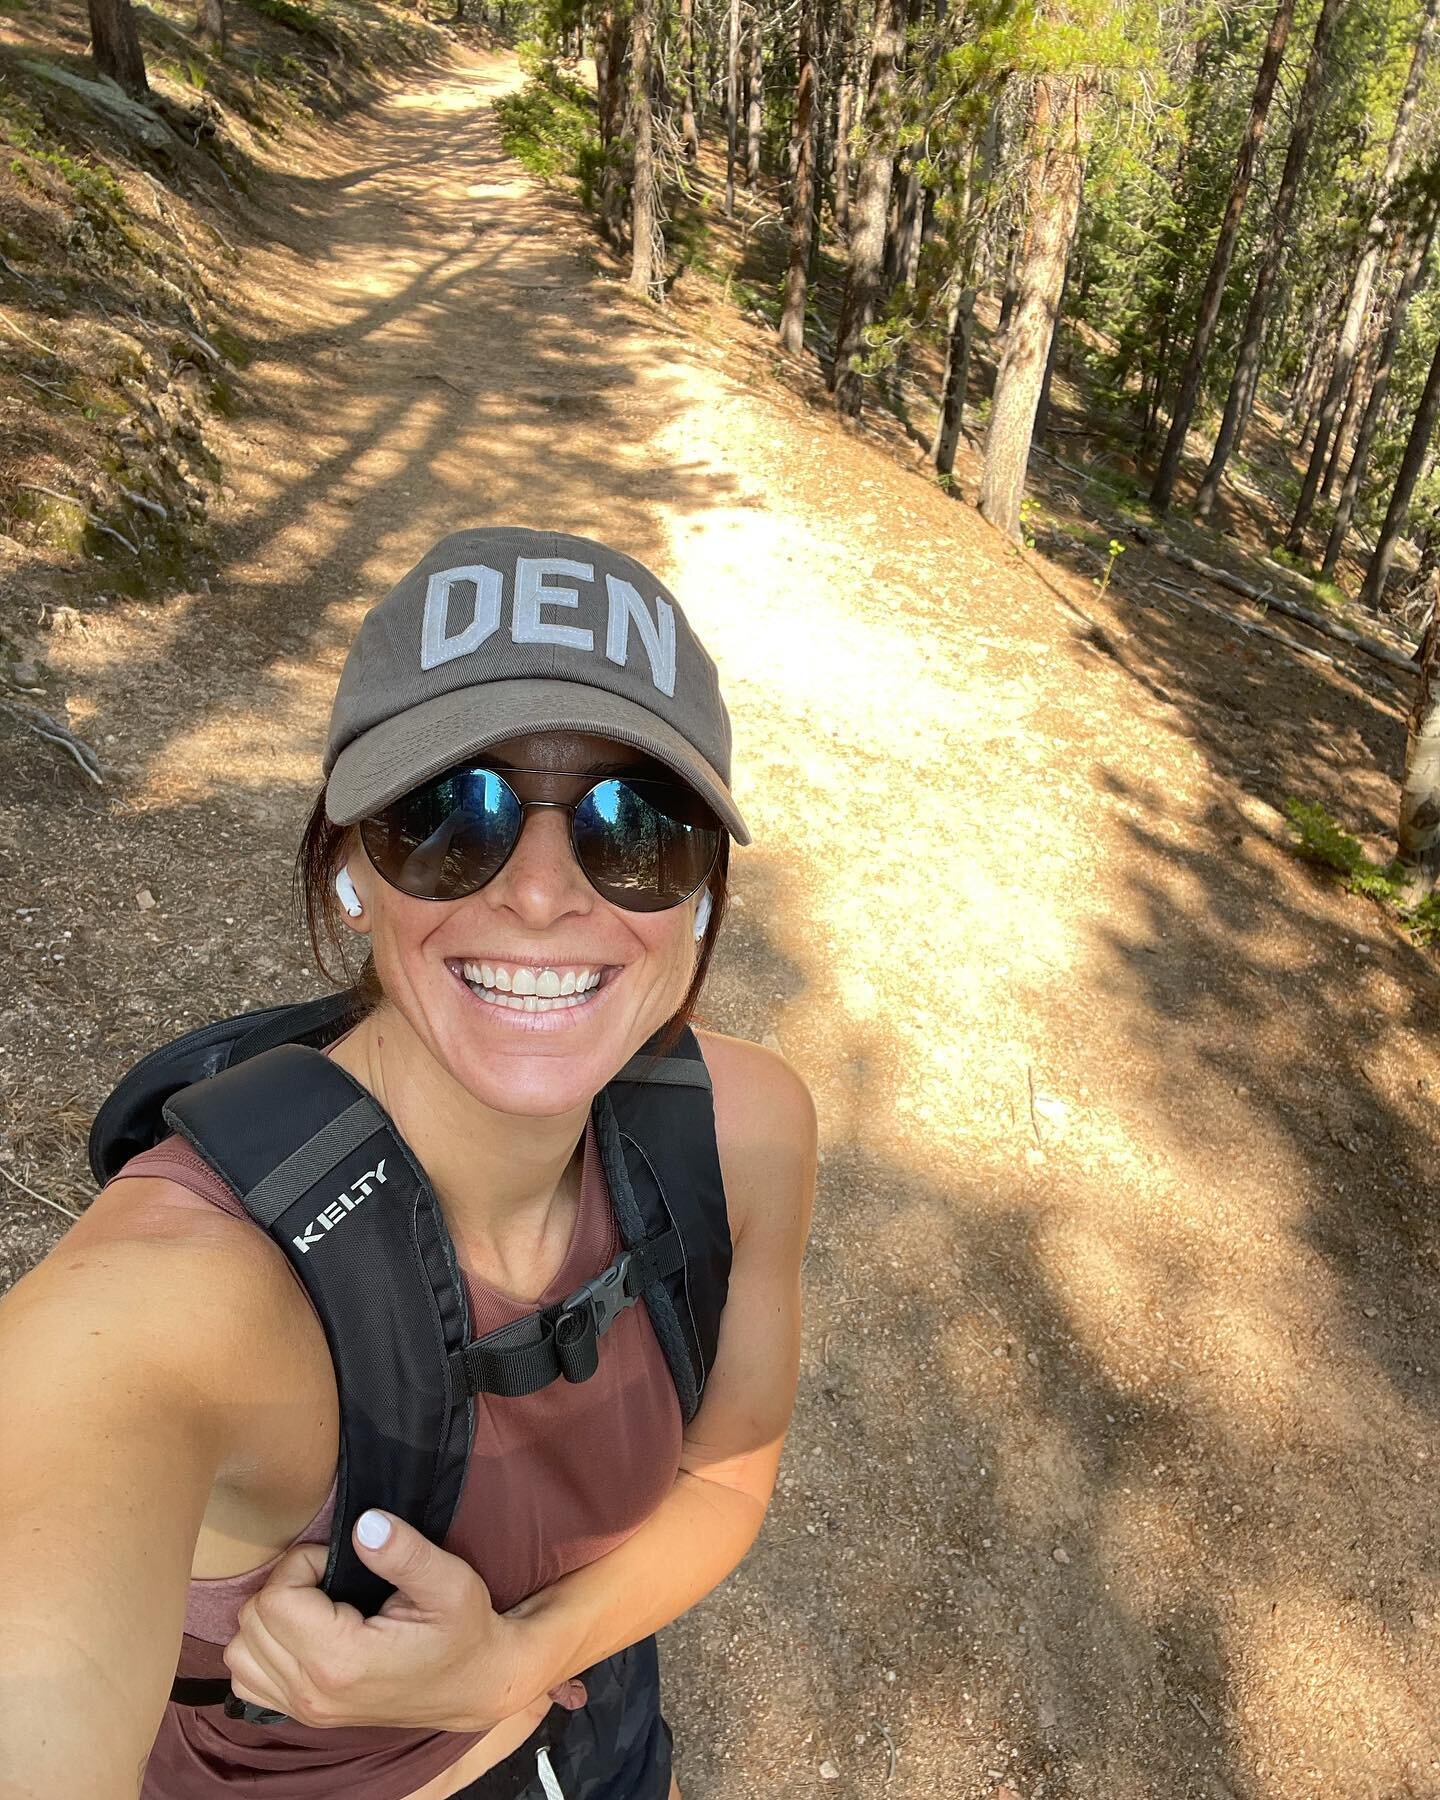 Getting lost in the mountains has become one of my specialties. Literally. I get lost almost every time I go on my own. Luckily I always find my way out. 

One of my favorite and at times infuriating quotes, &ldquo;getting lost is not a waste of time